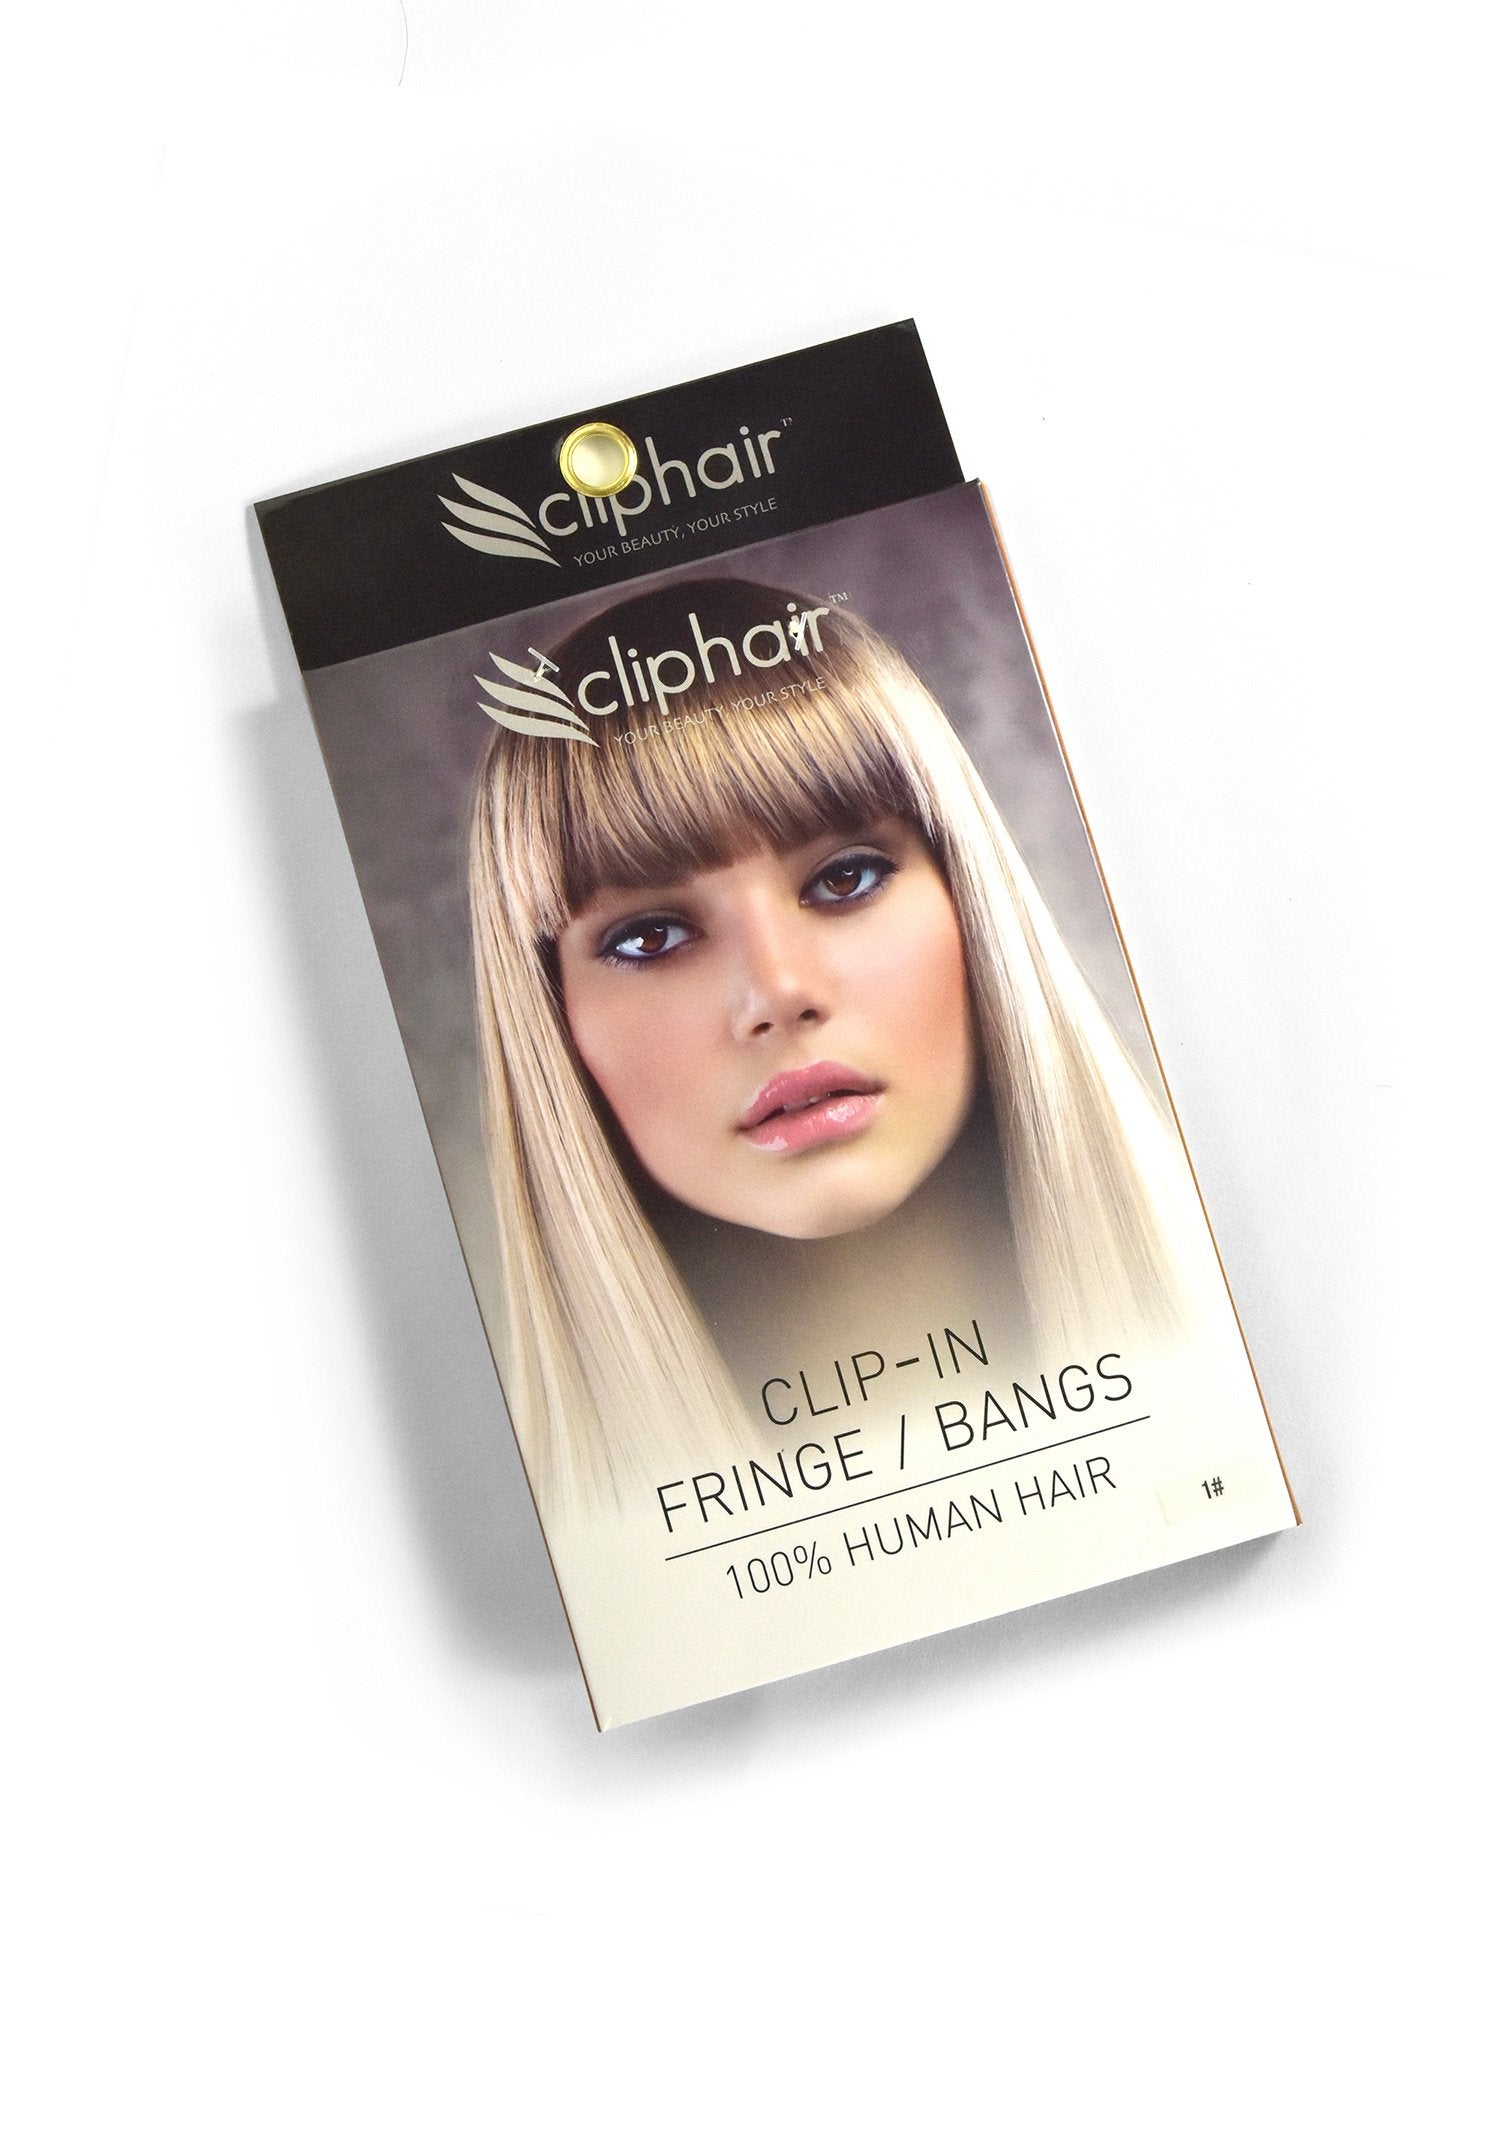 Clip in /on Remy Human Hair Fringe / Bangs - Bright Red